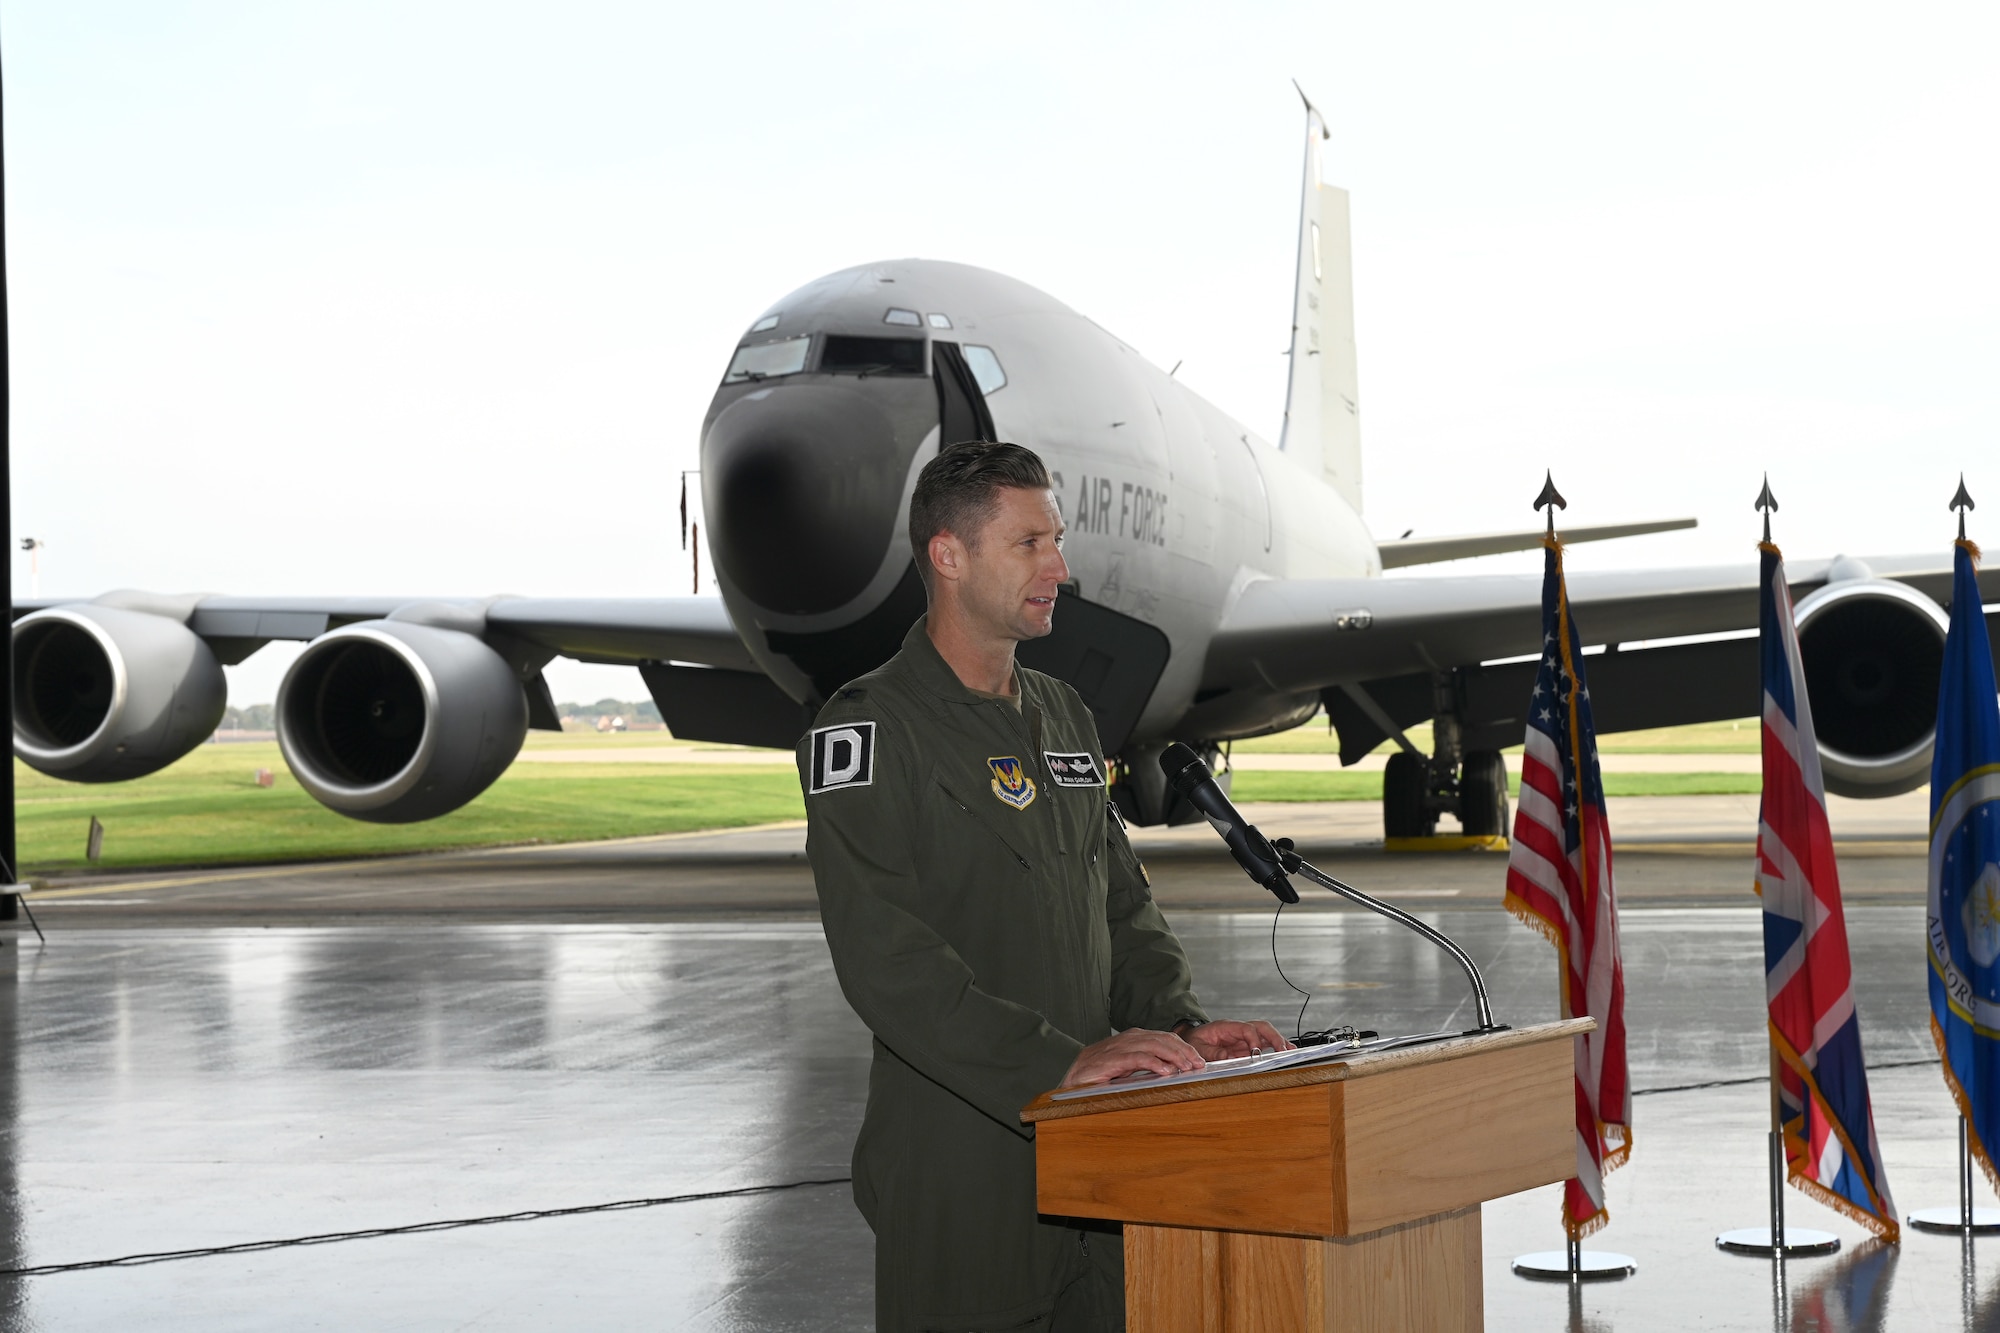 U.S. Air Force Col. Ryan Garlow, 100th Air Refueling Wing commander, shares some of the history of what became known as “Black Week” for the 100th Bomb Group during World War II, and the heritage of “Squawkin Hawk,” originally a B-17 Flying Fortress, now a nose art on a KC-135 Stratotanker during a nose art dedication ceremony at Royal Air Force Mildenhall, England, Oct. 10, 2023. Garlow also has a personal tie to the 100th Bomb Group as his step-grandfather, Tech. Sgt. James P. Scott Jr., was part of the crew on the B-17 “High Life,” also stationed at Thorpe Abbotts during World War II. (U.S. Air Force photo by Karen Abeyasekere)